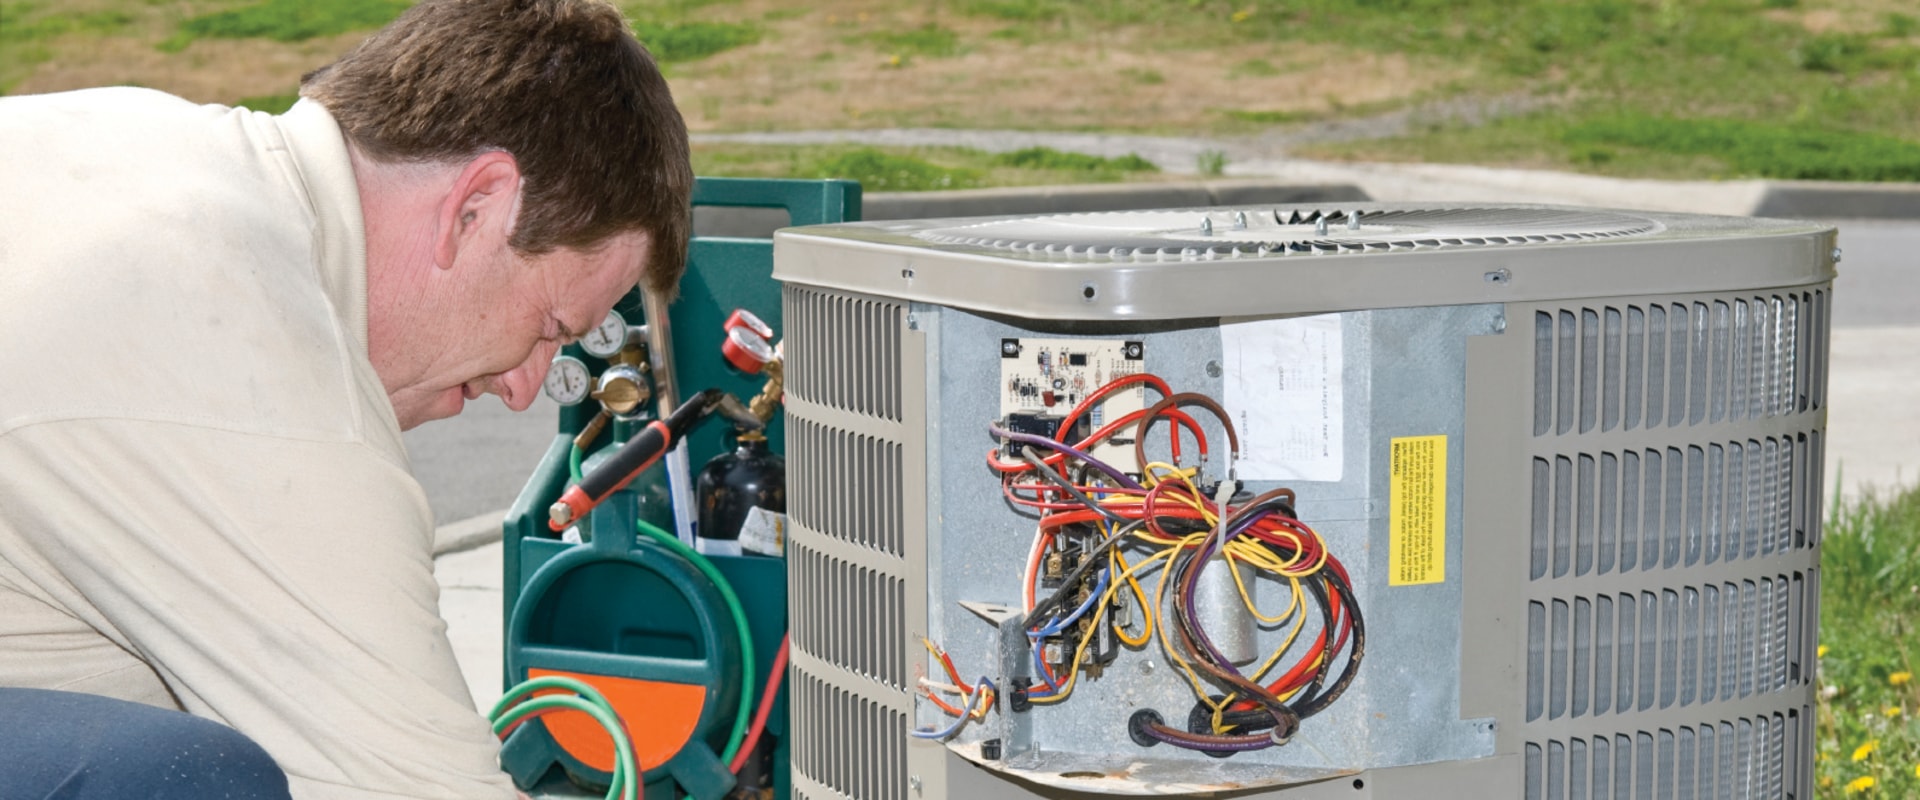 Choosing the Right Thermostat for Your HVAC System in West Palm Beach, FL